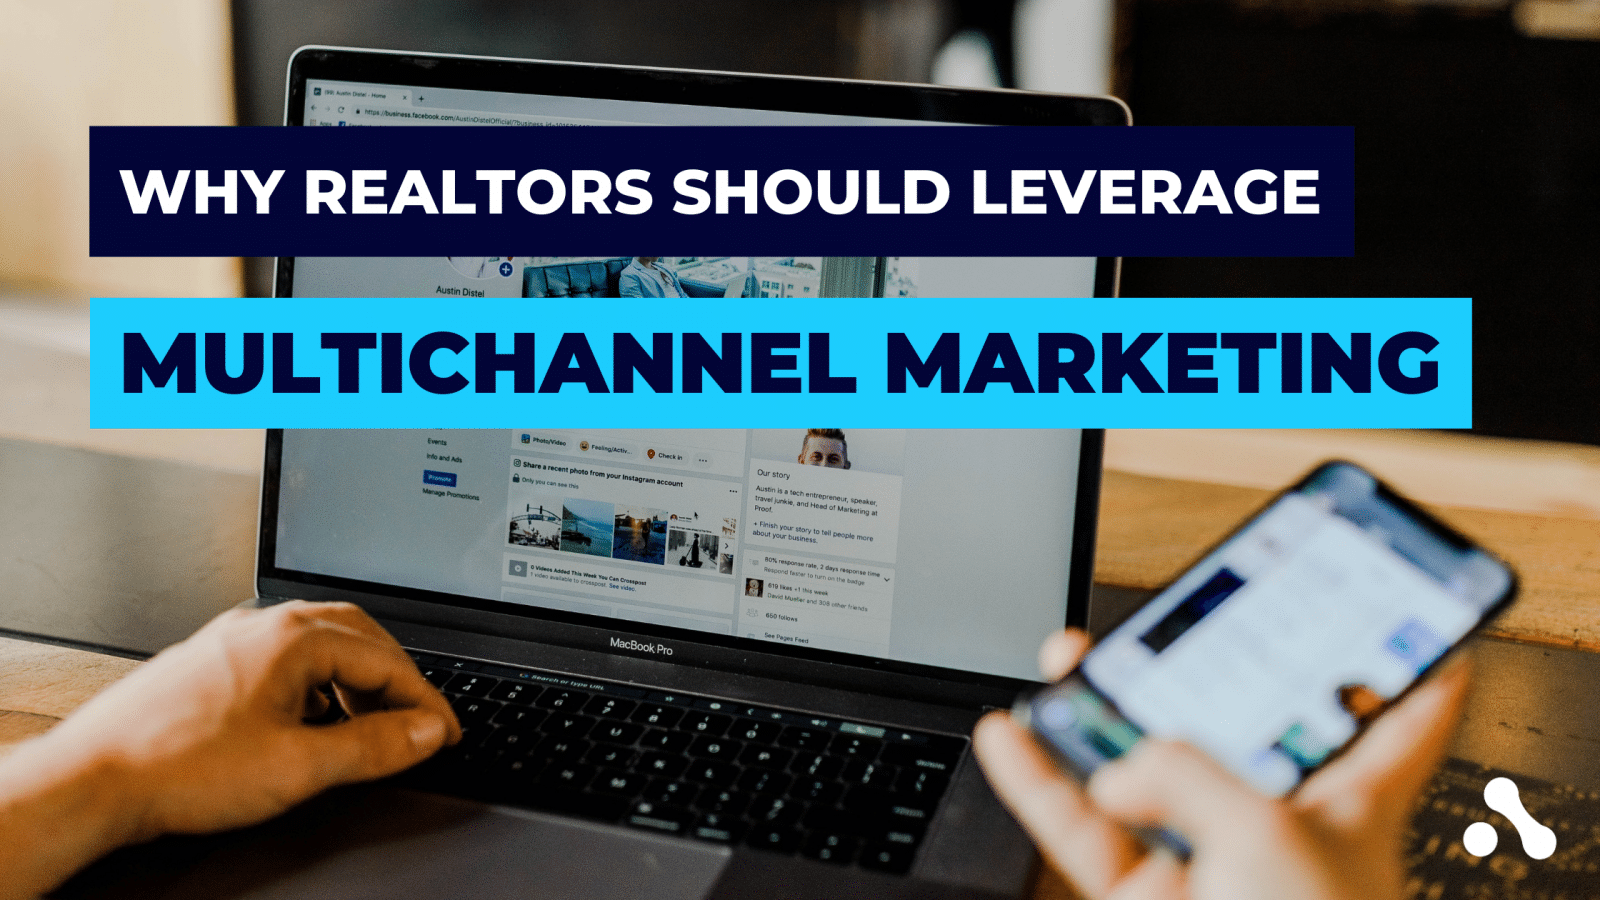 Realtors can leverage multichannel marketing to multiply lead generation and ROI